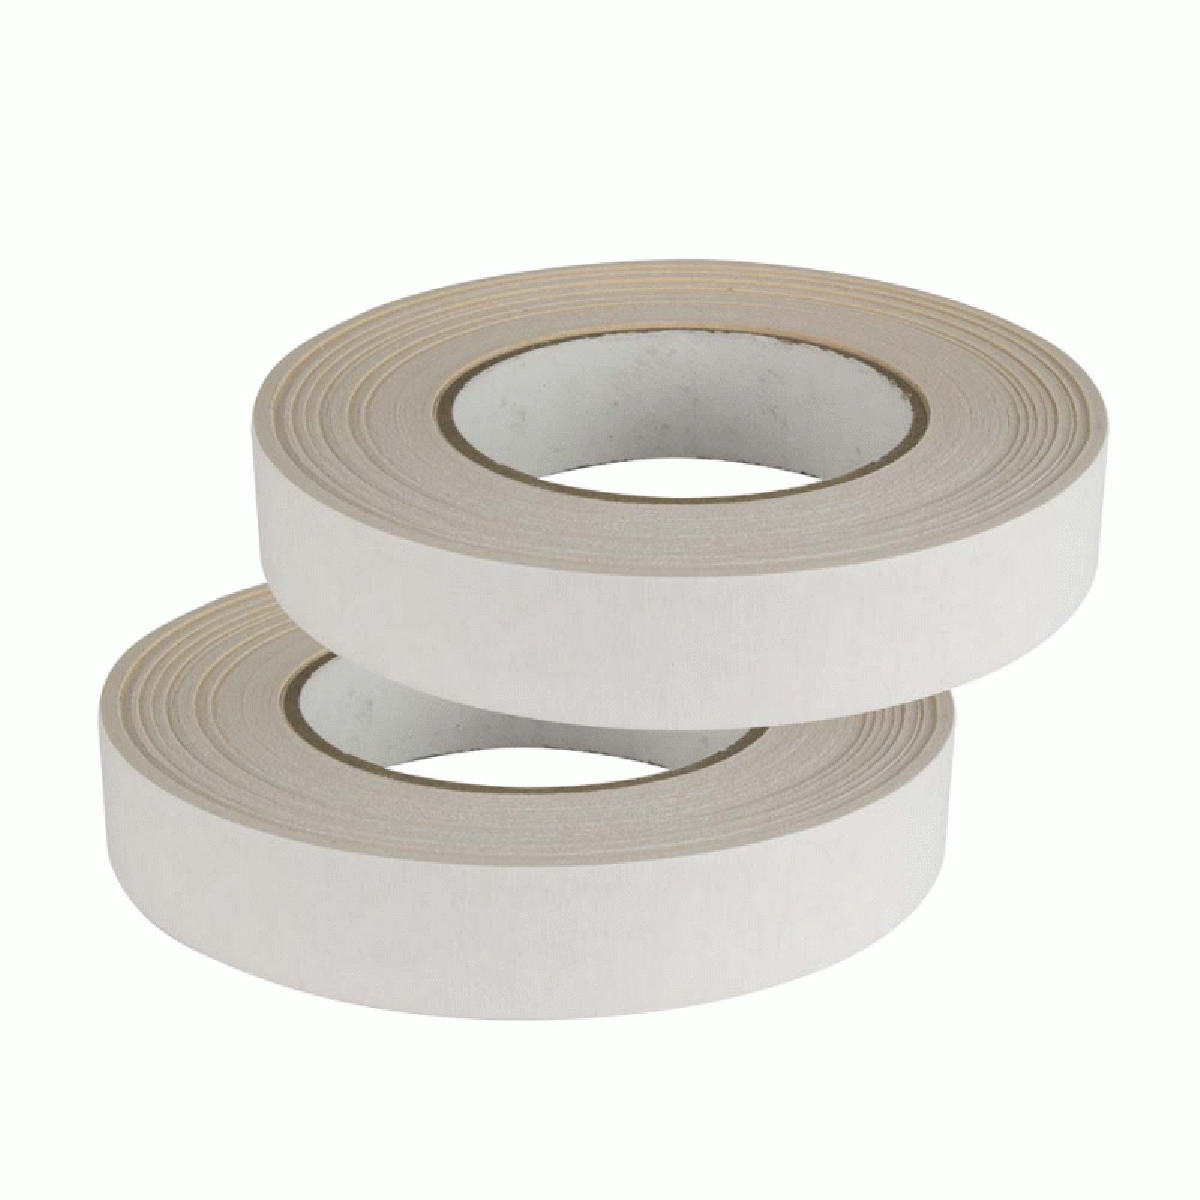 2 SIDED TEMPLATE TAPE WHITE 1IN X 36YD  EA